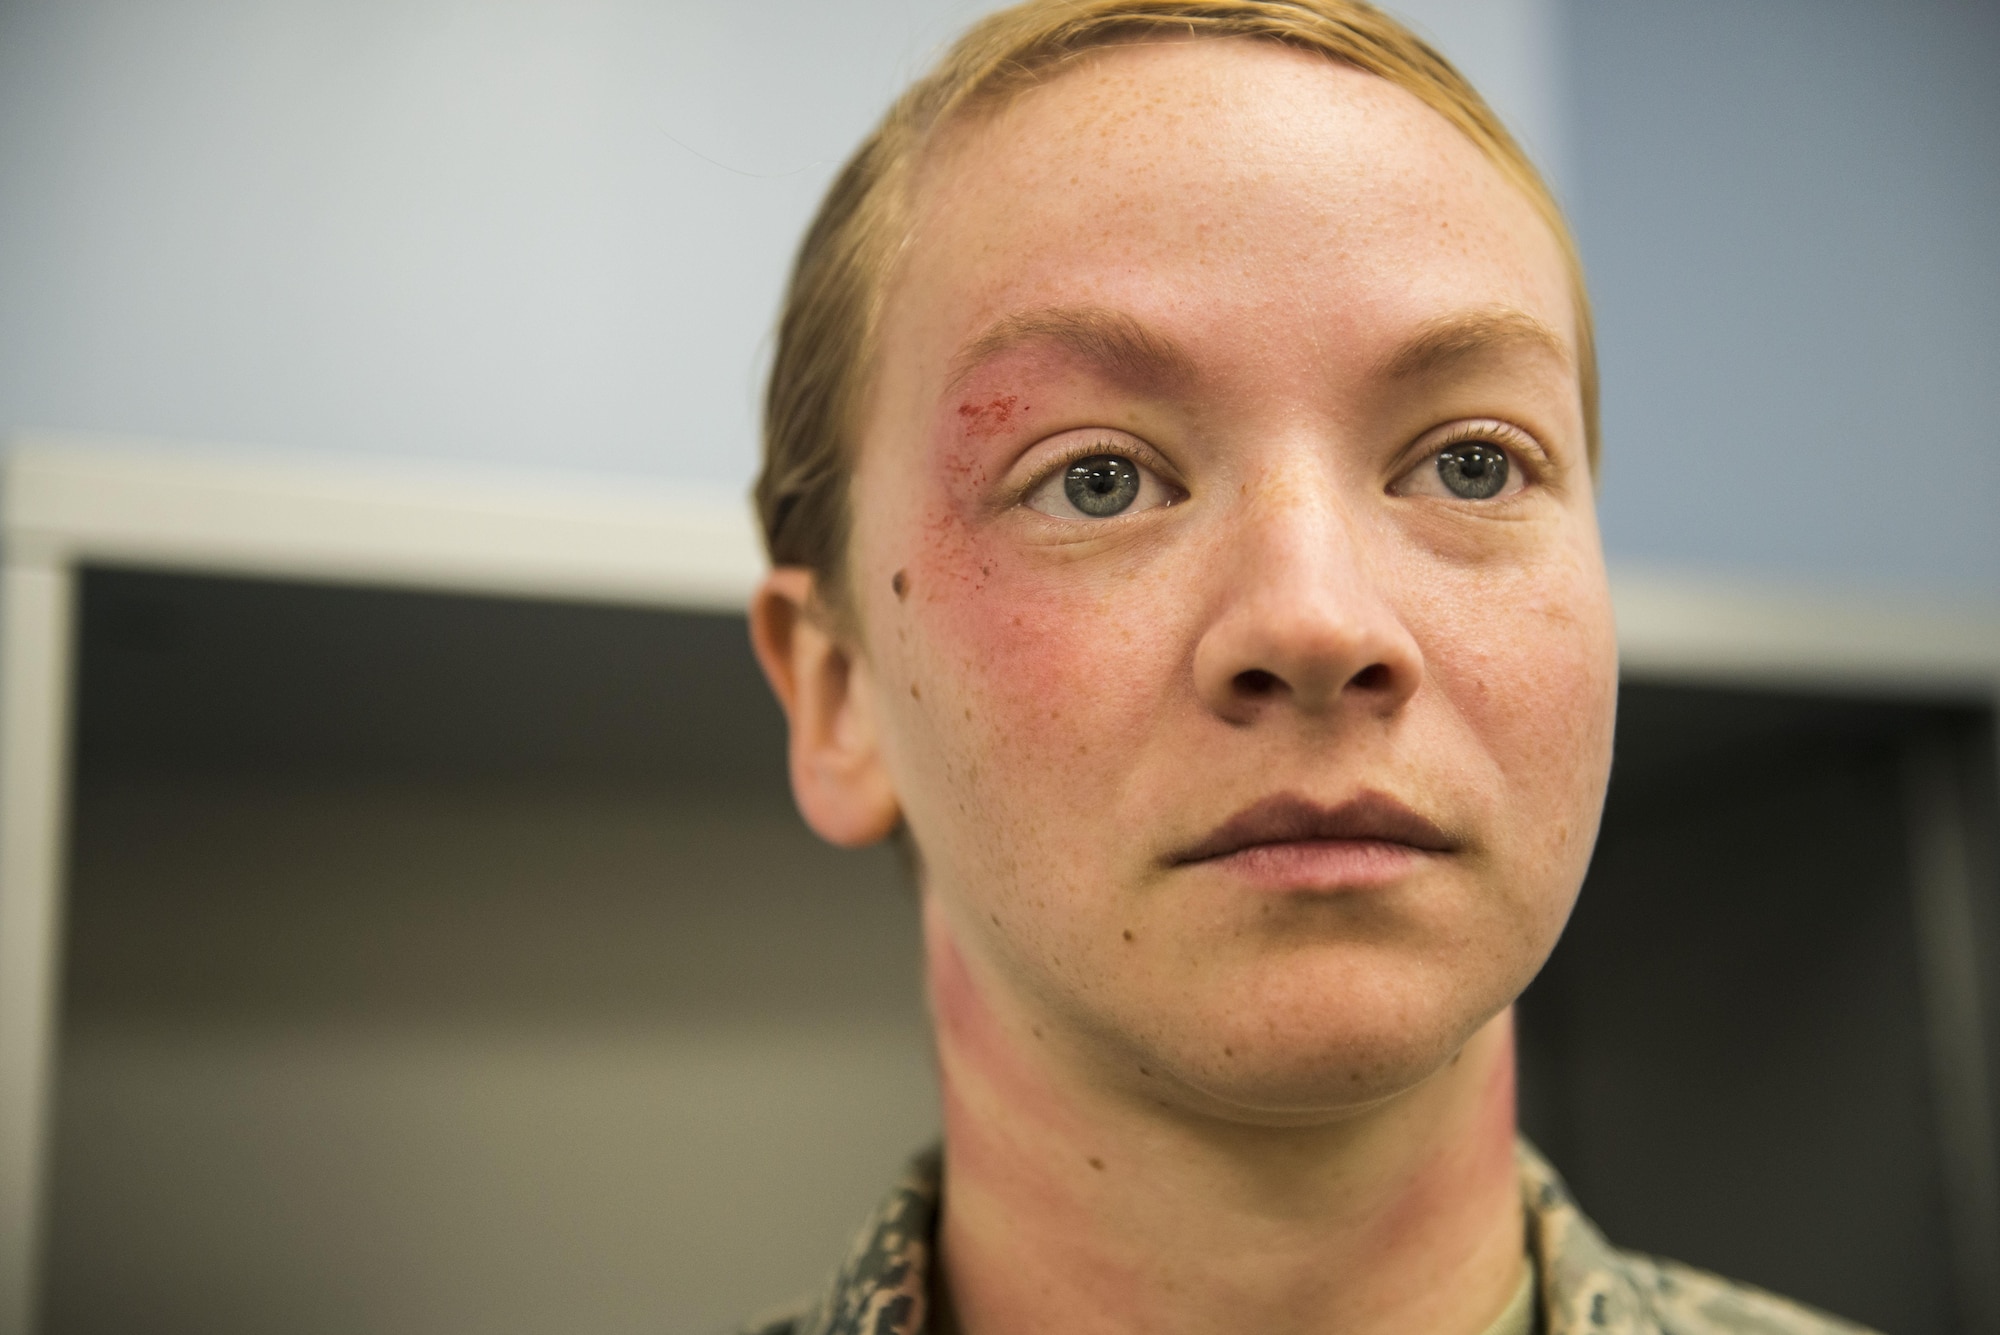 During the project, volunteers wore makeup to emulate domestic violence bruises as they went through their day.